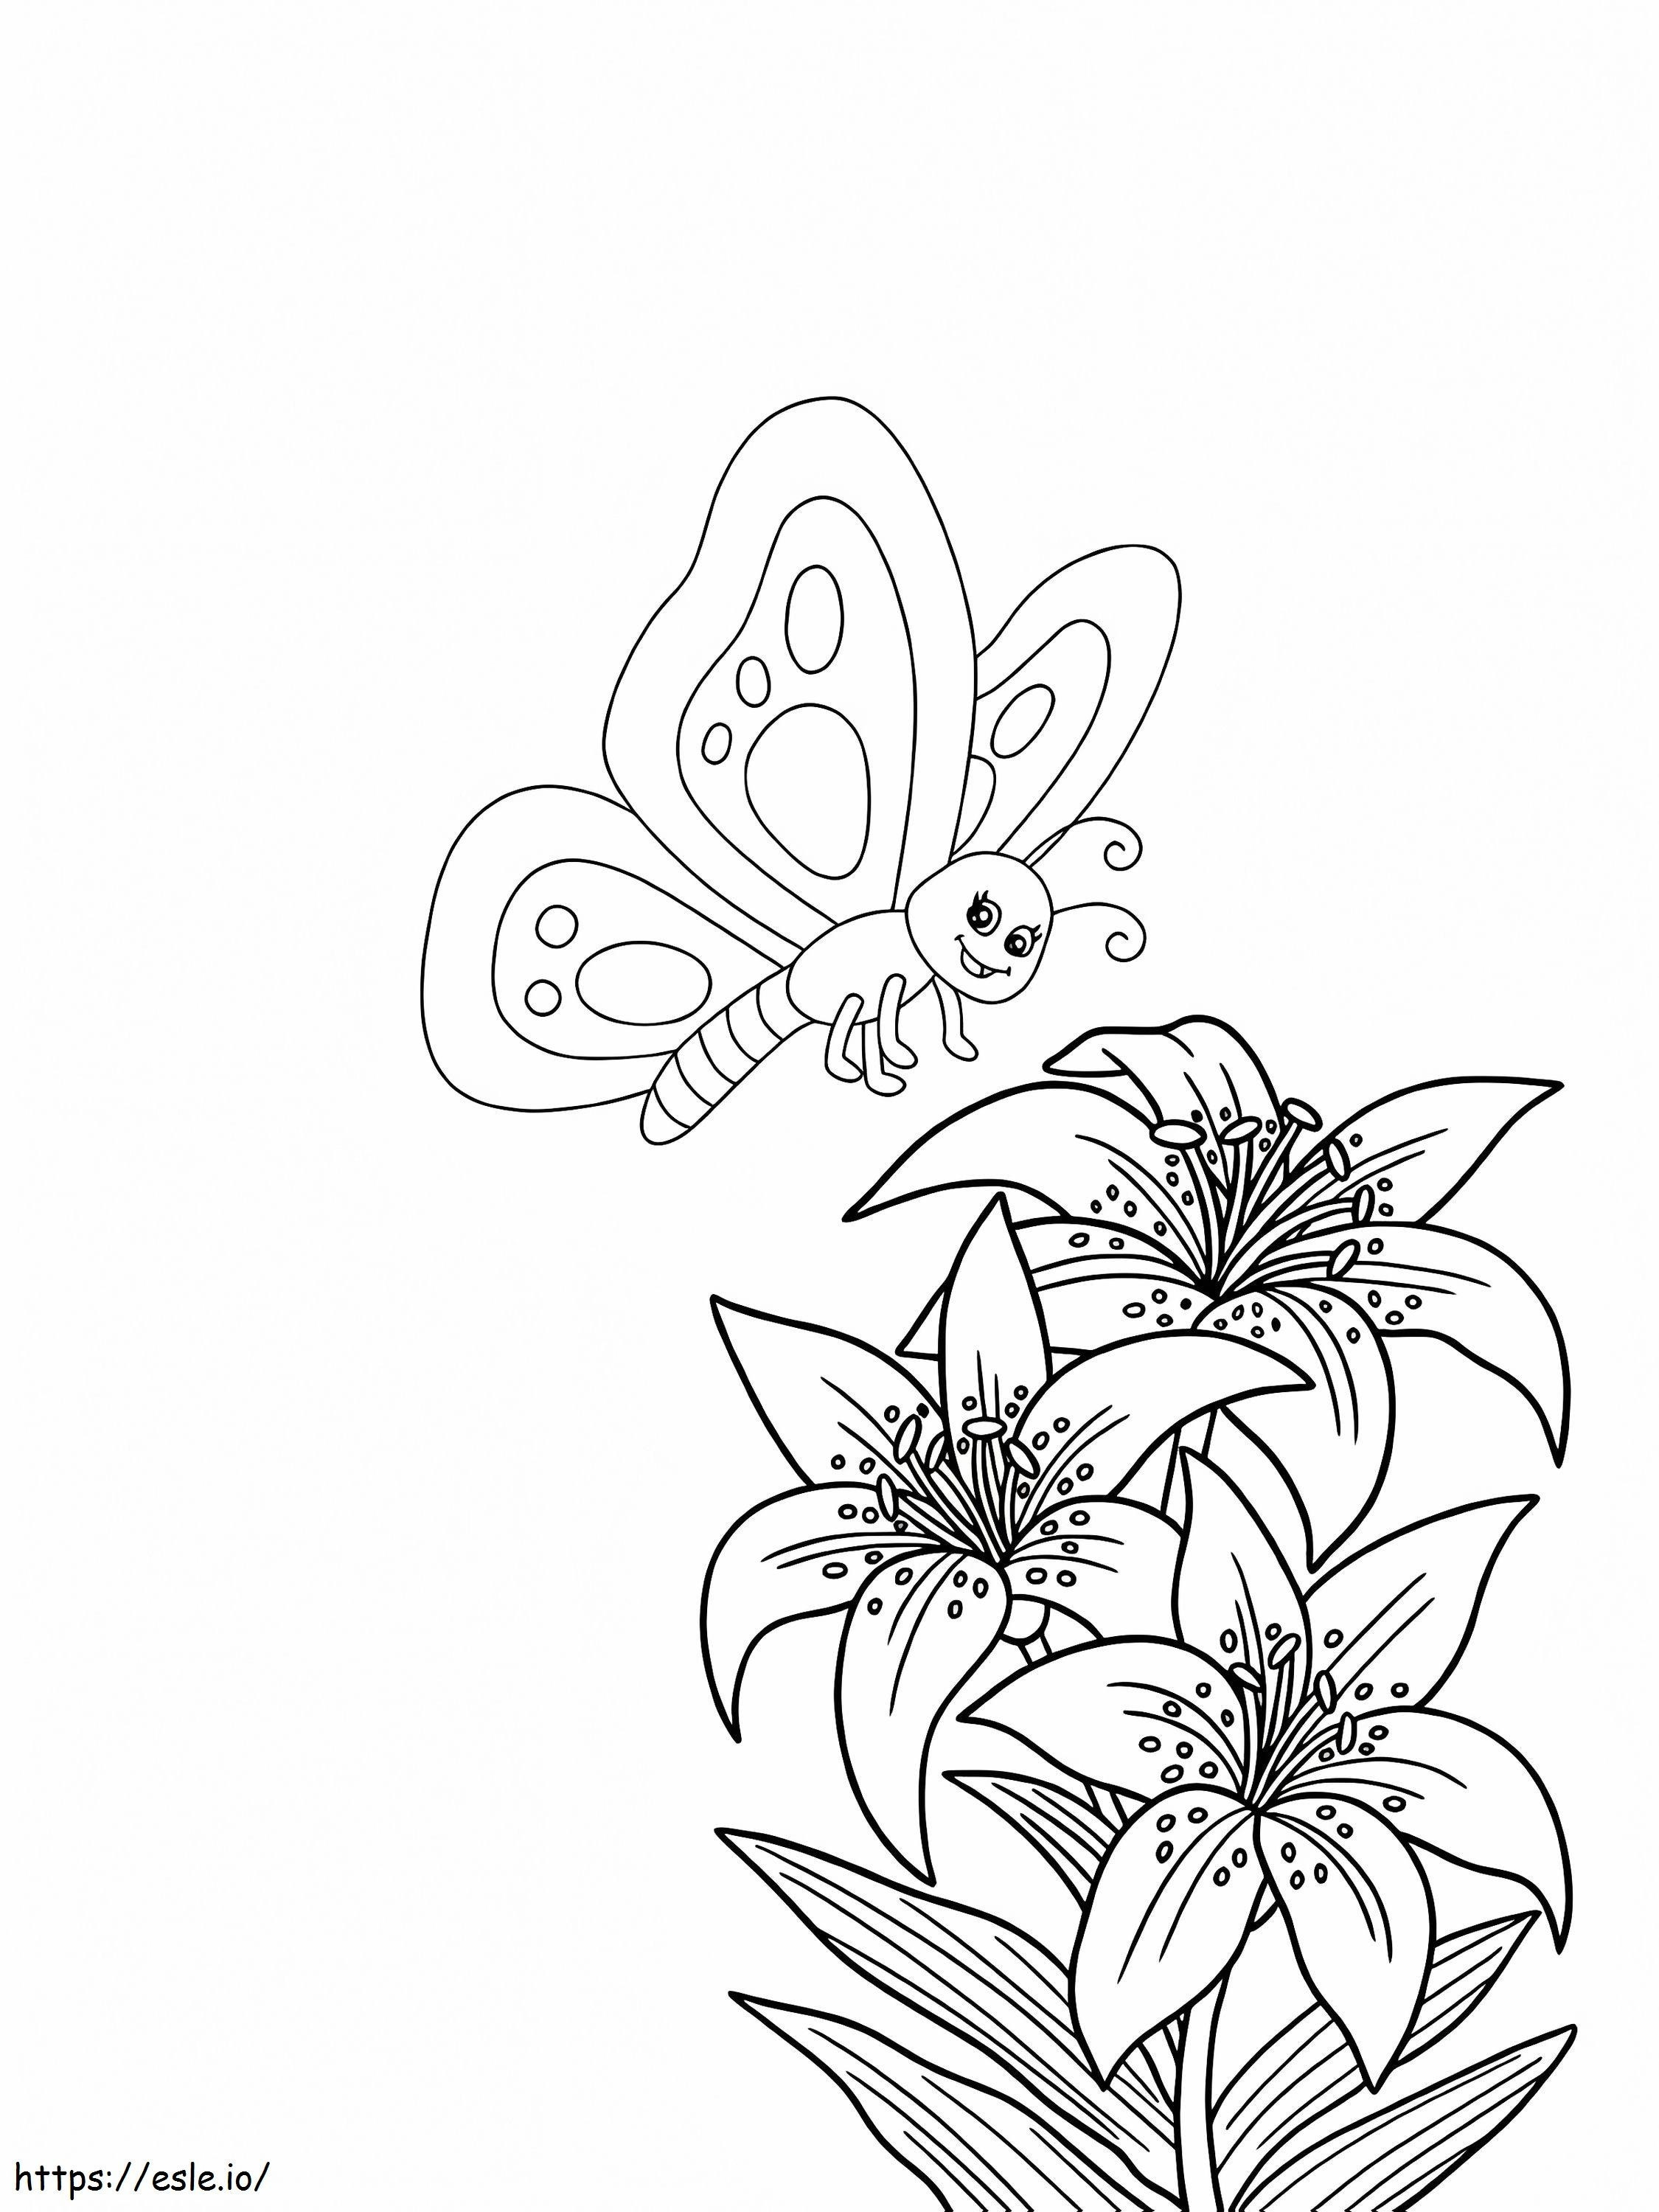 Lilies Flower And Butterfly coloring page